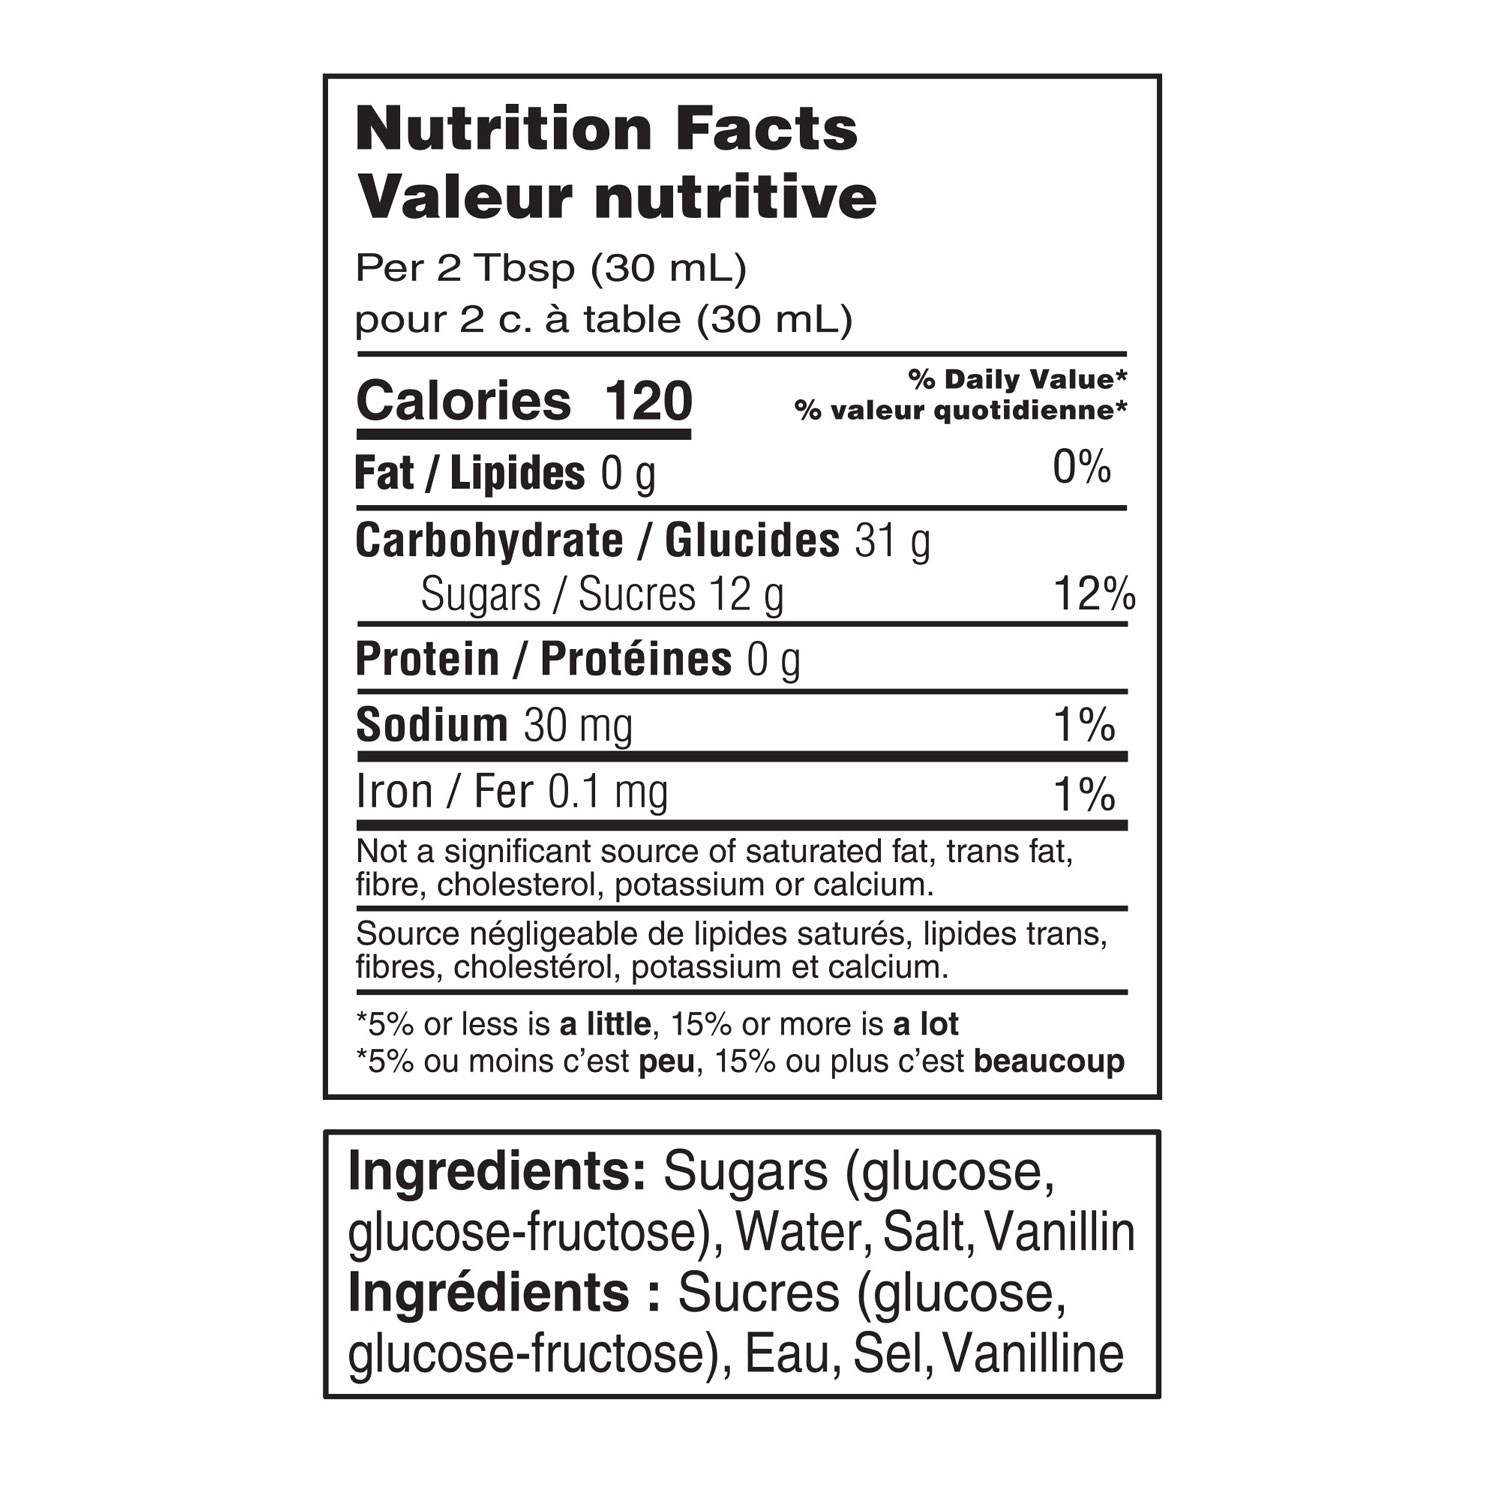 Crown® Lily White Corn Syrup Nutrition Facts